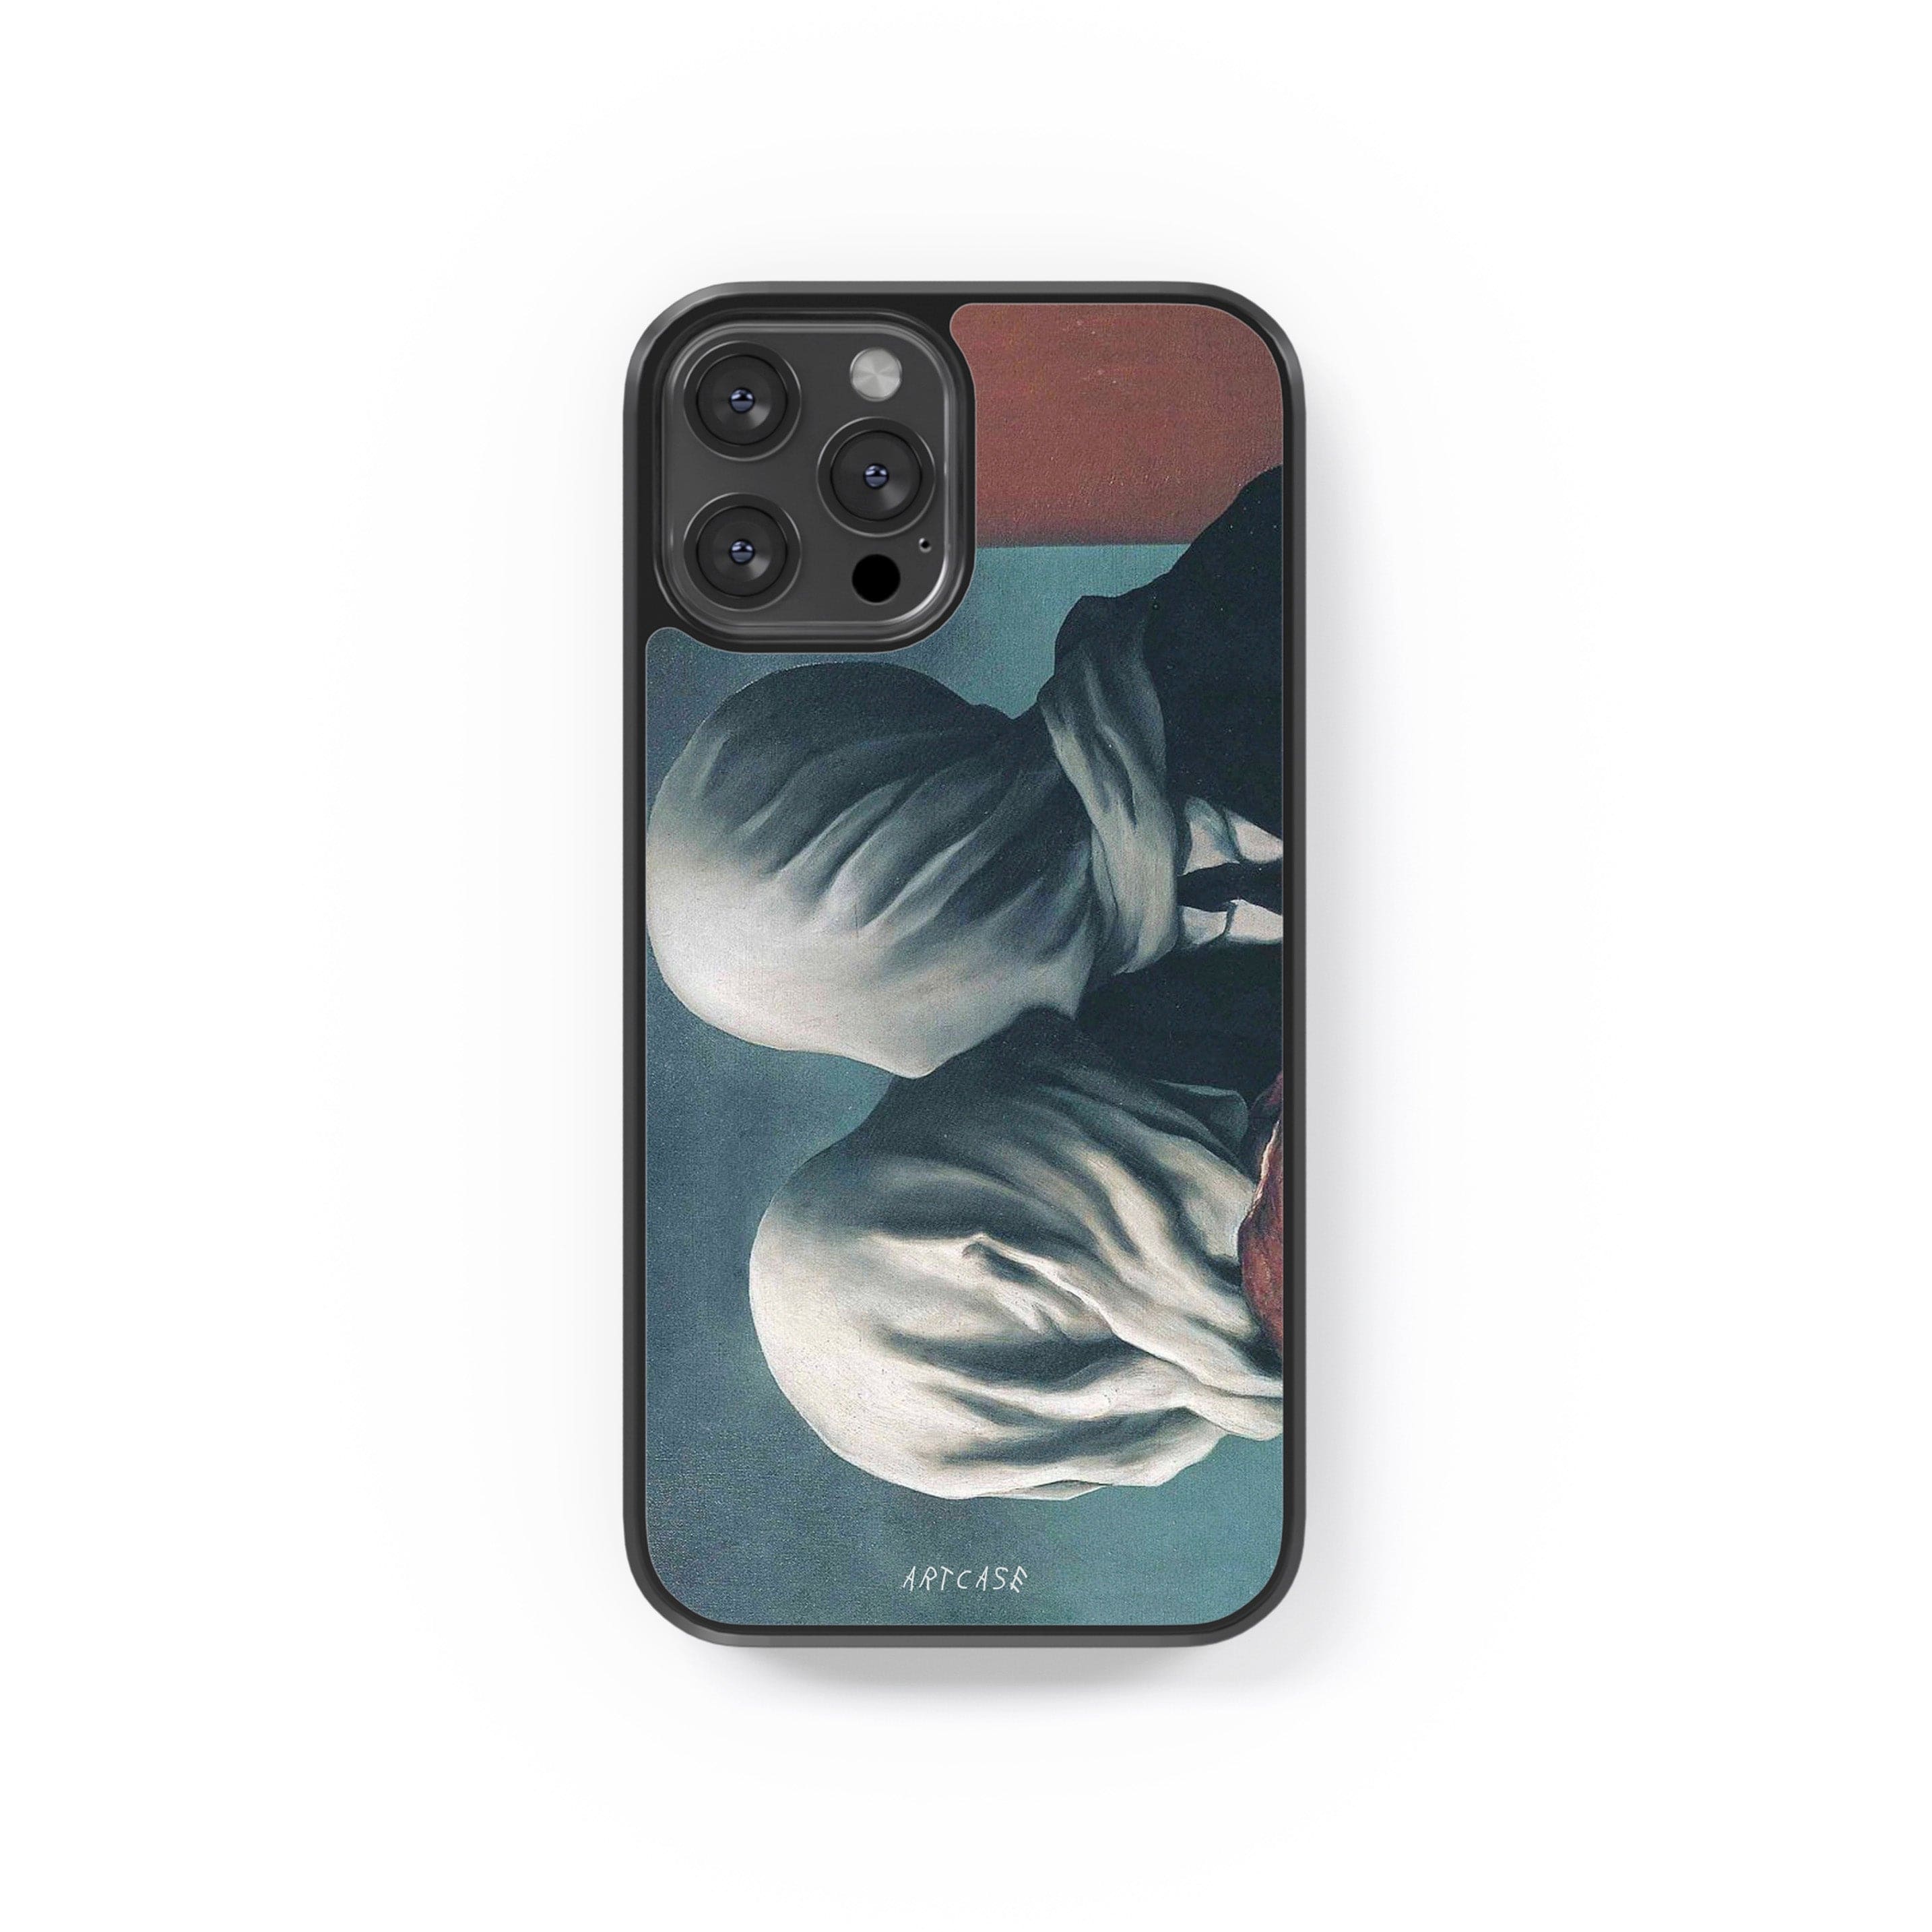 Phone case "The Lovers"